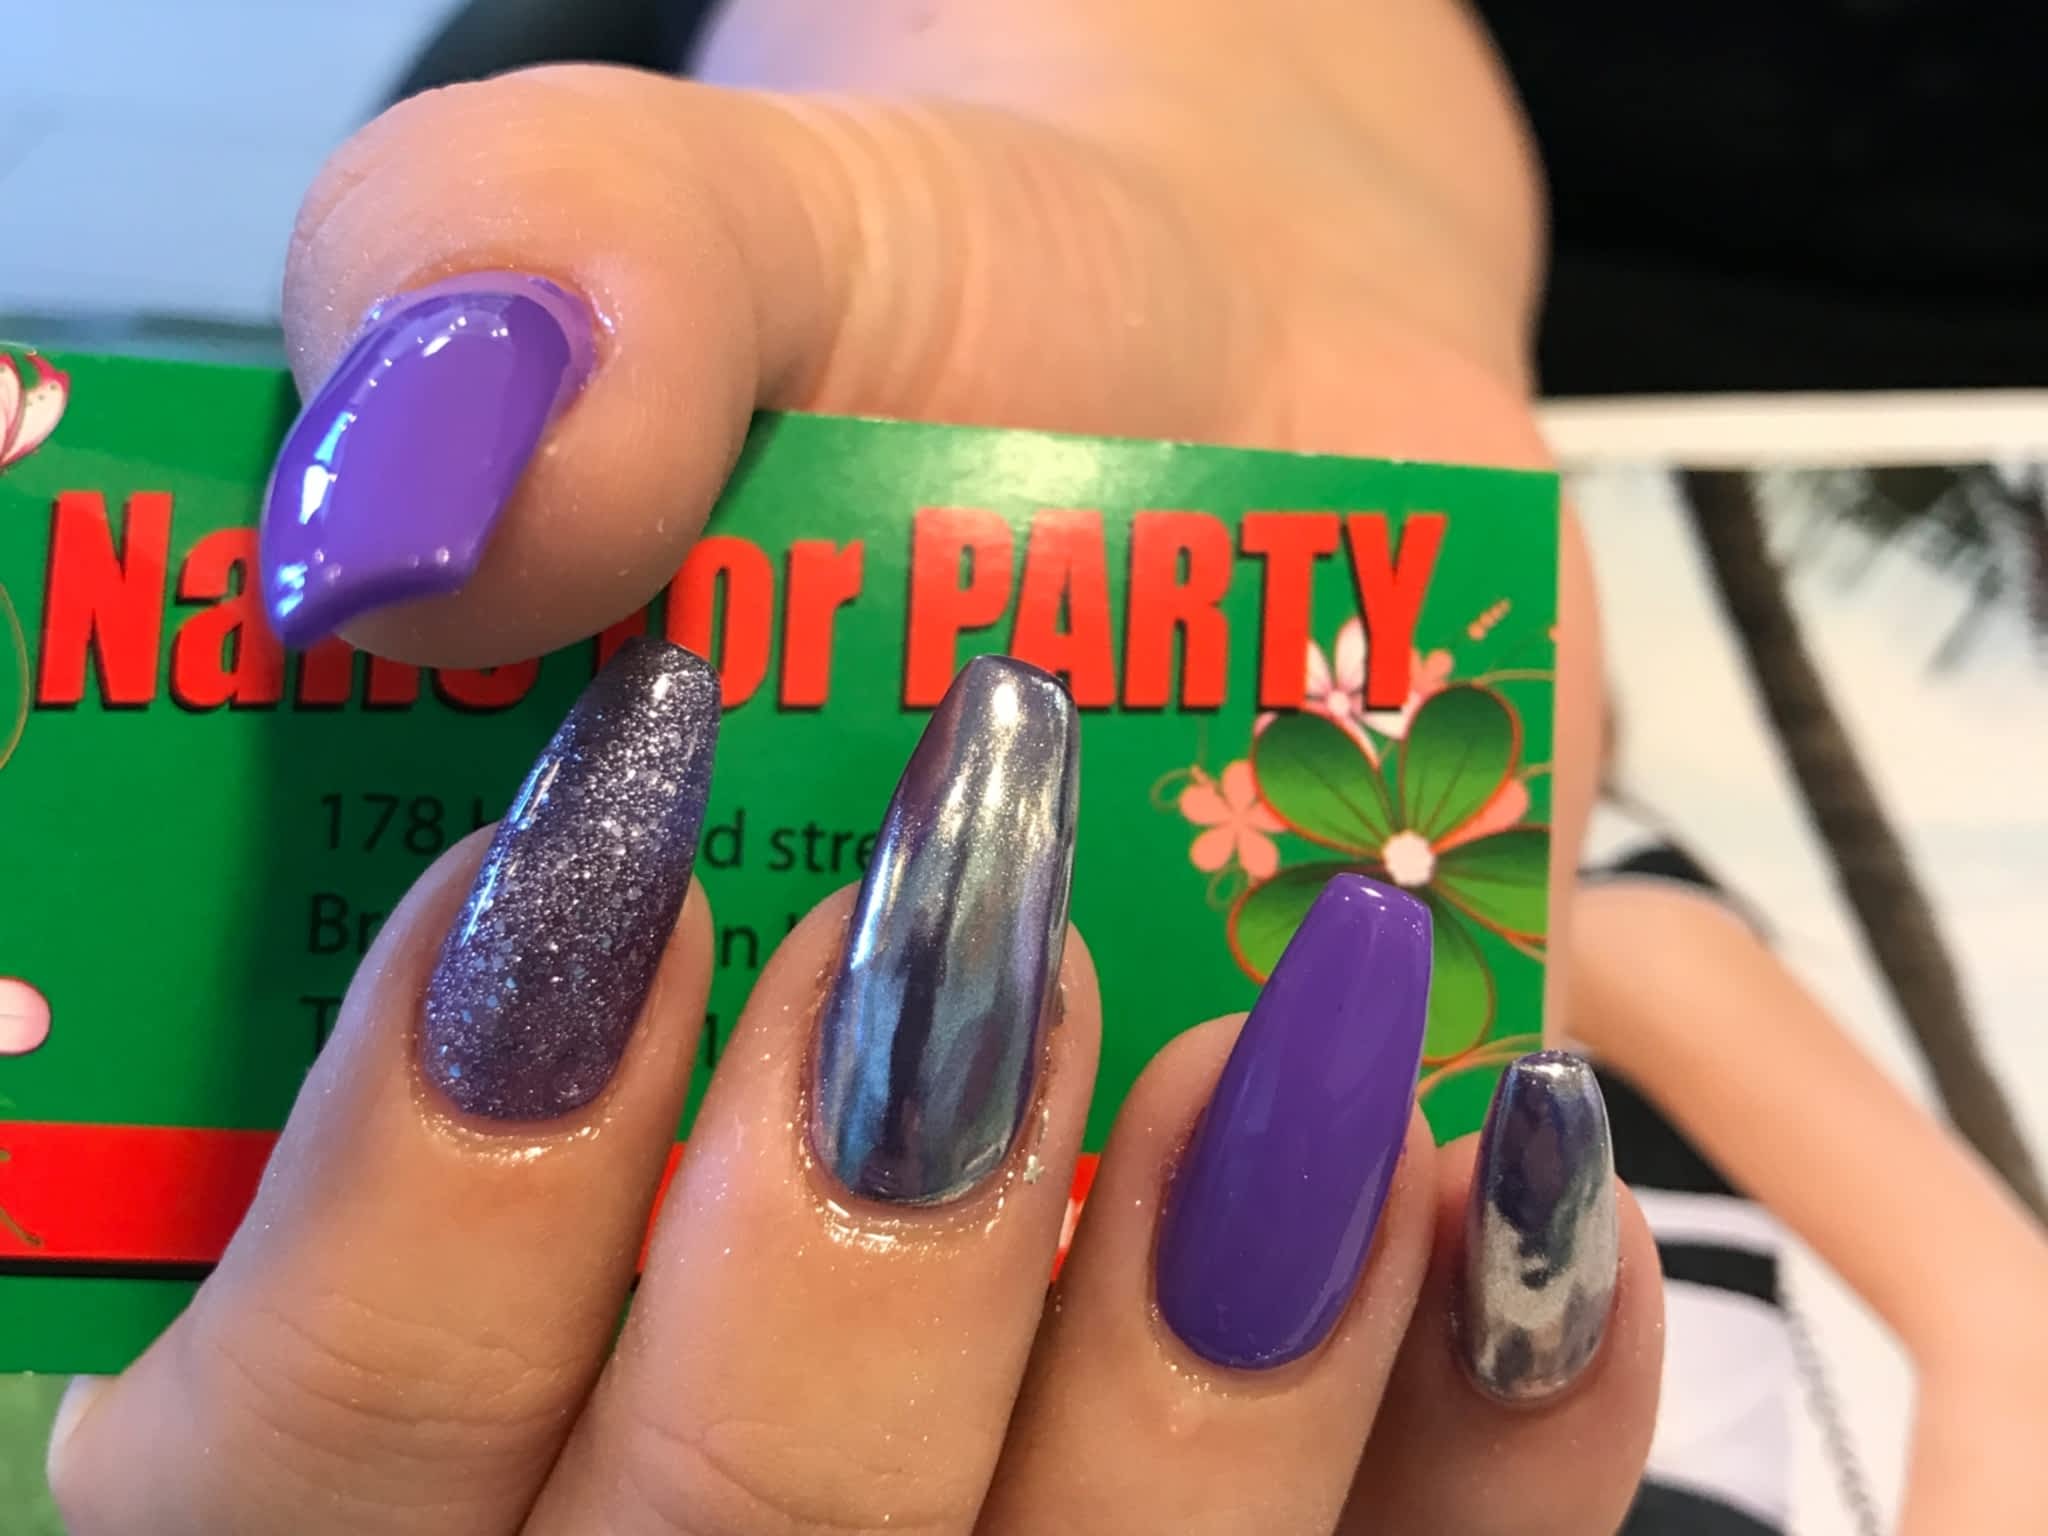 photo Nails For Party Luxury Spa